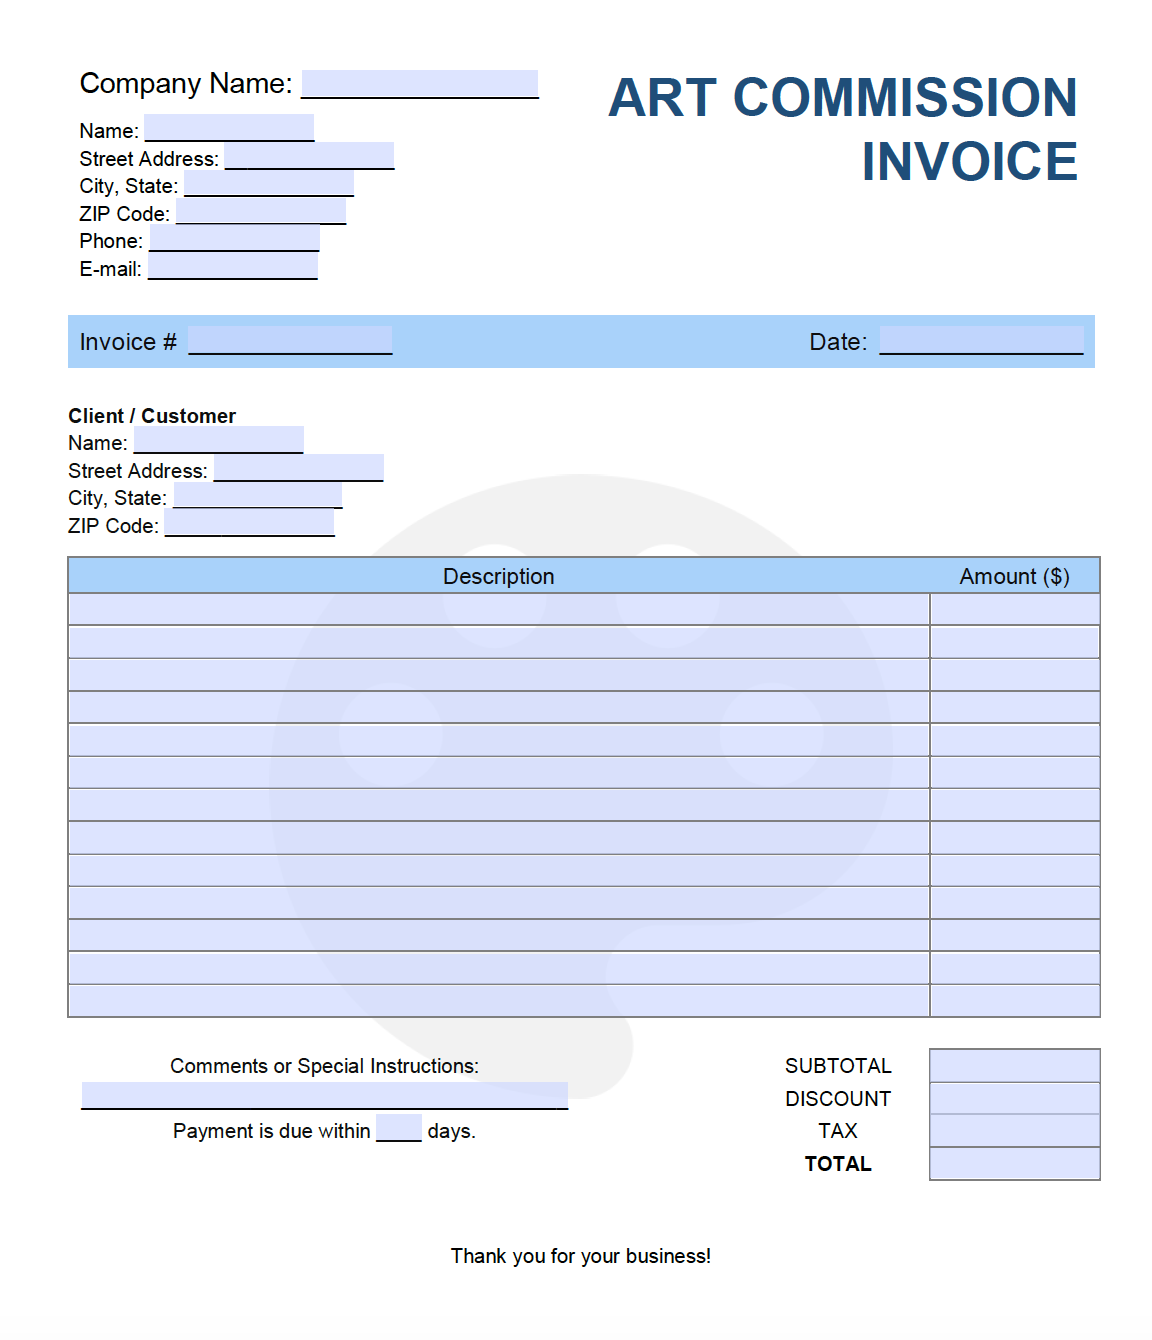 Free Art Commission Invoice Template | PDF | WORD | EXCEL